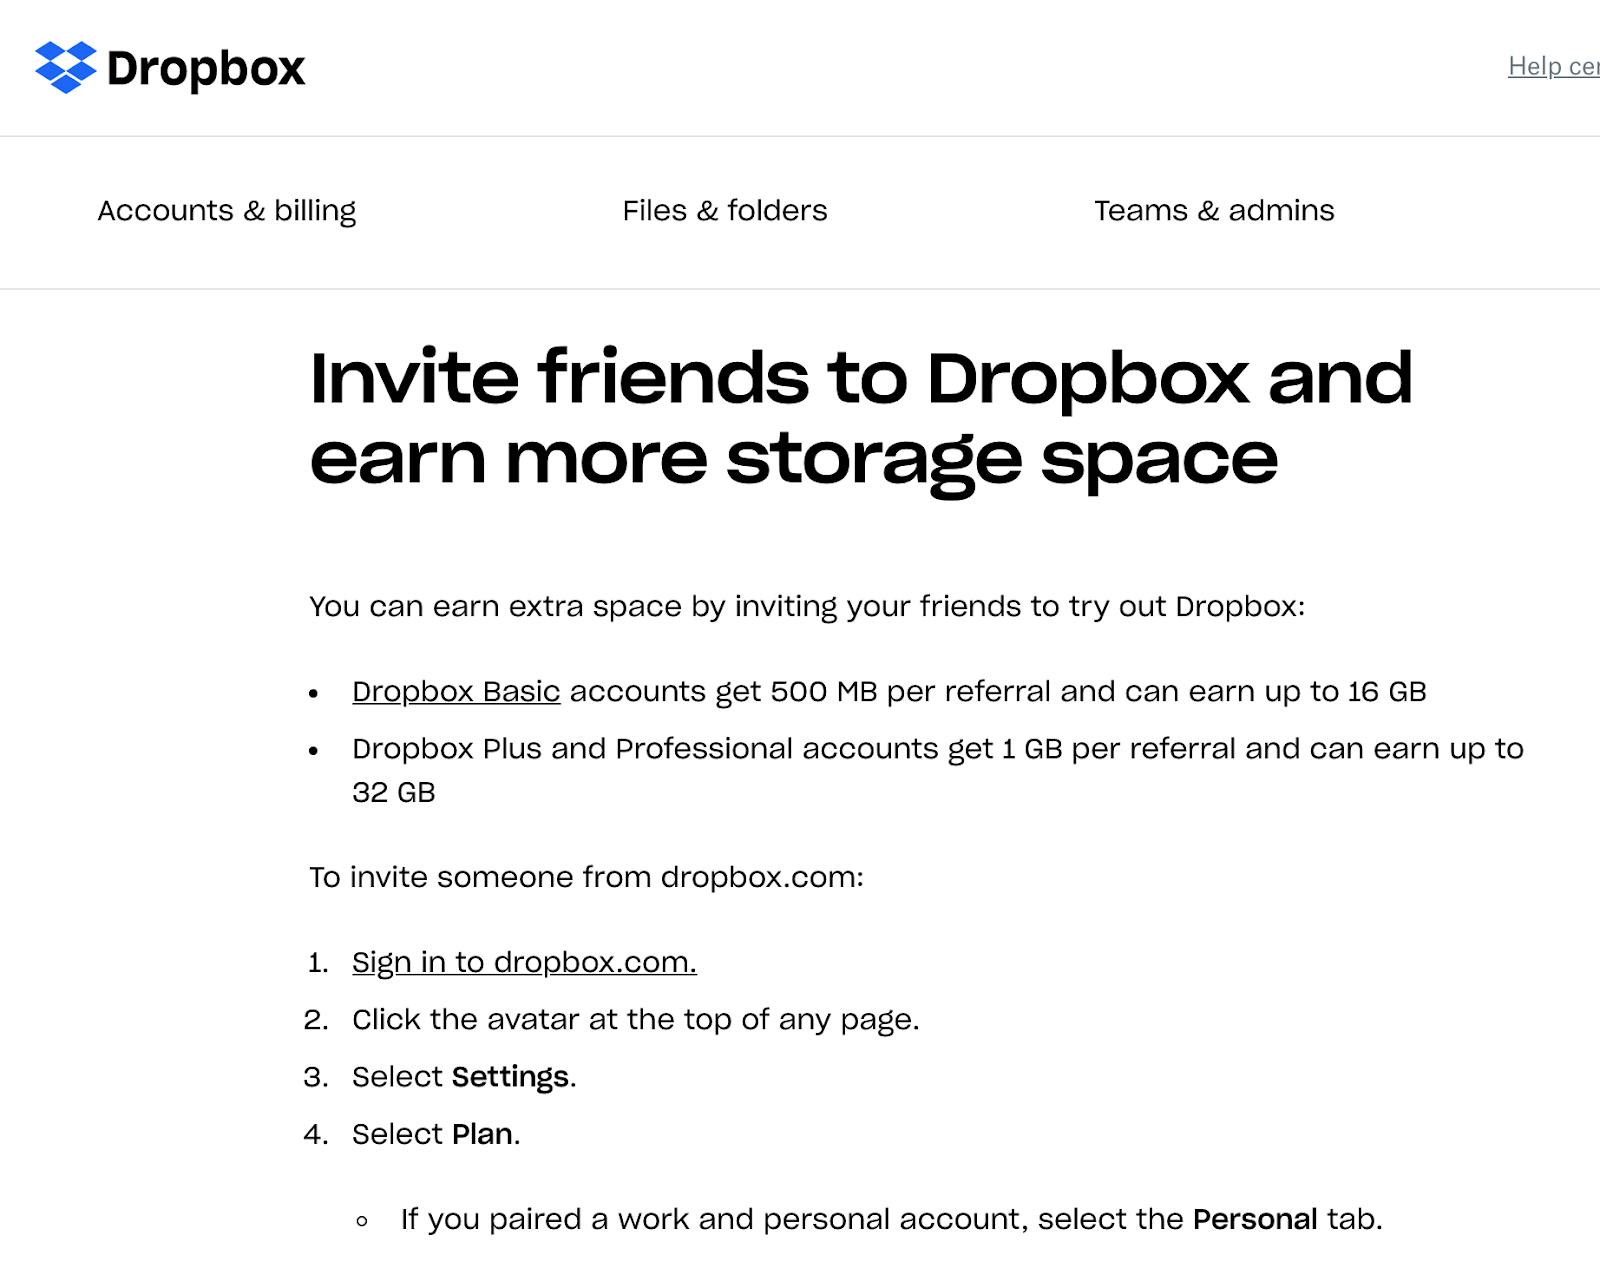 "Invite friends to Dropbox and earn more storage space"